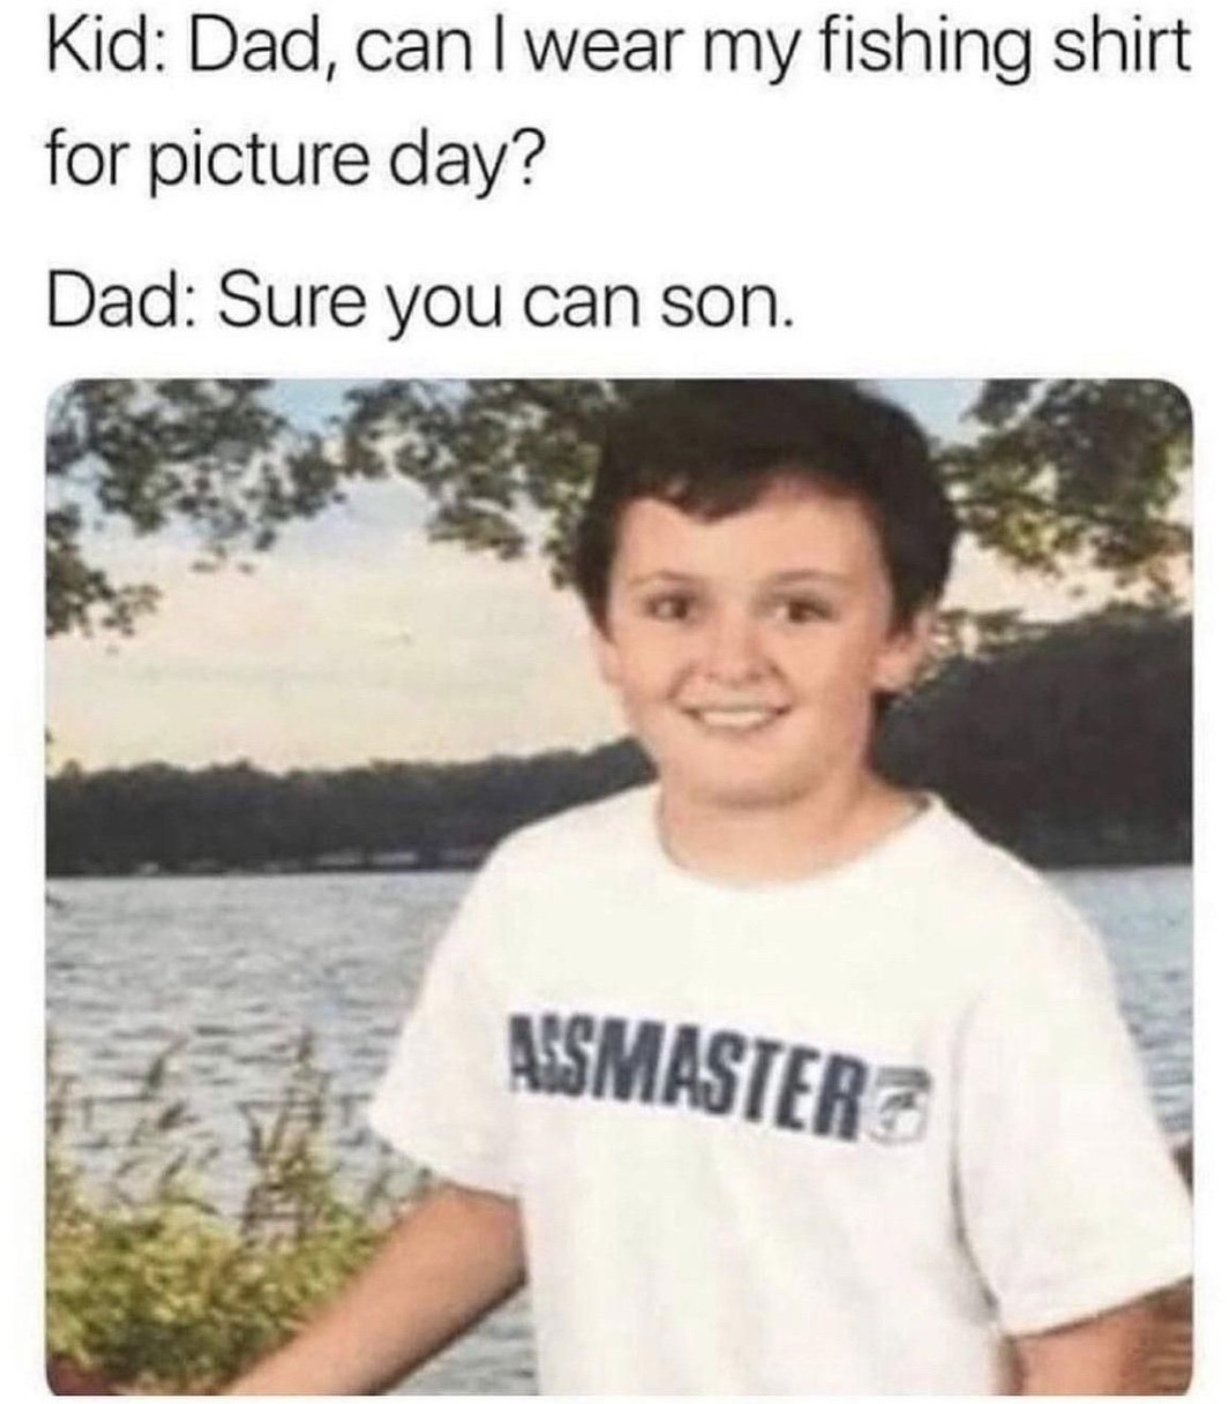 kid, dad can i wear my fishing shirt for picture day,?, dad, sure you can son, assmaster